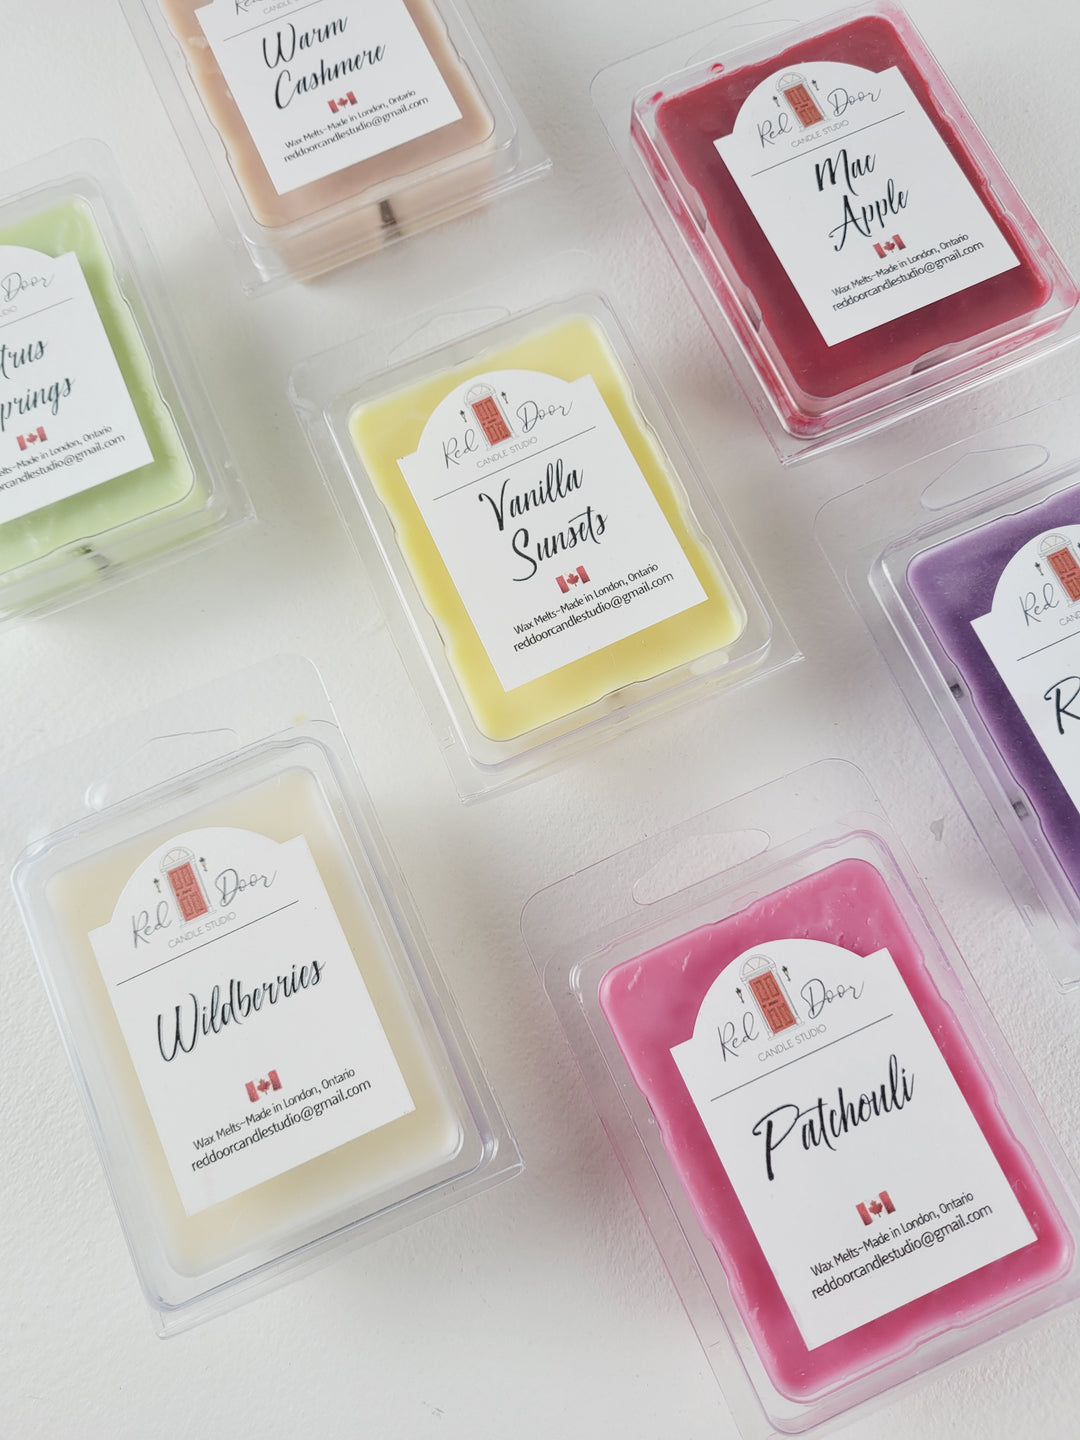 Red Door Candle Studio, 6 Pack Soy Wax Melts